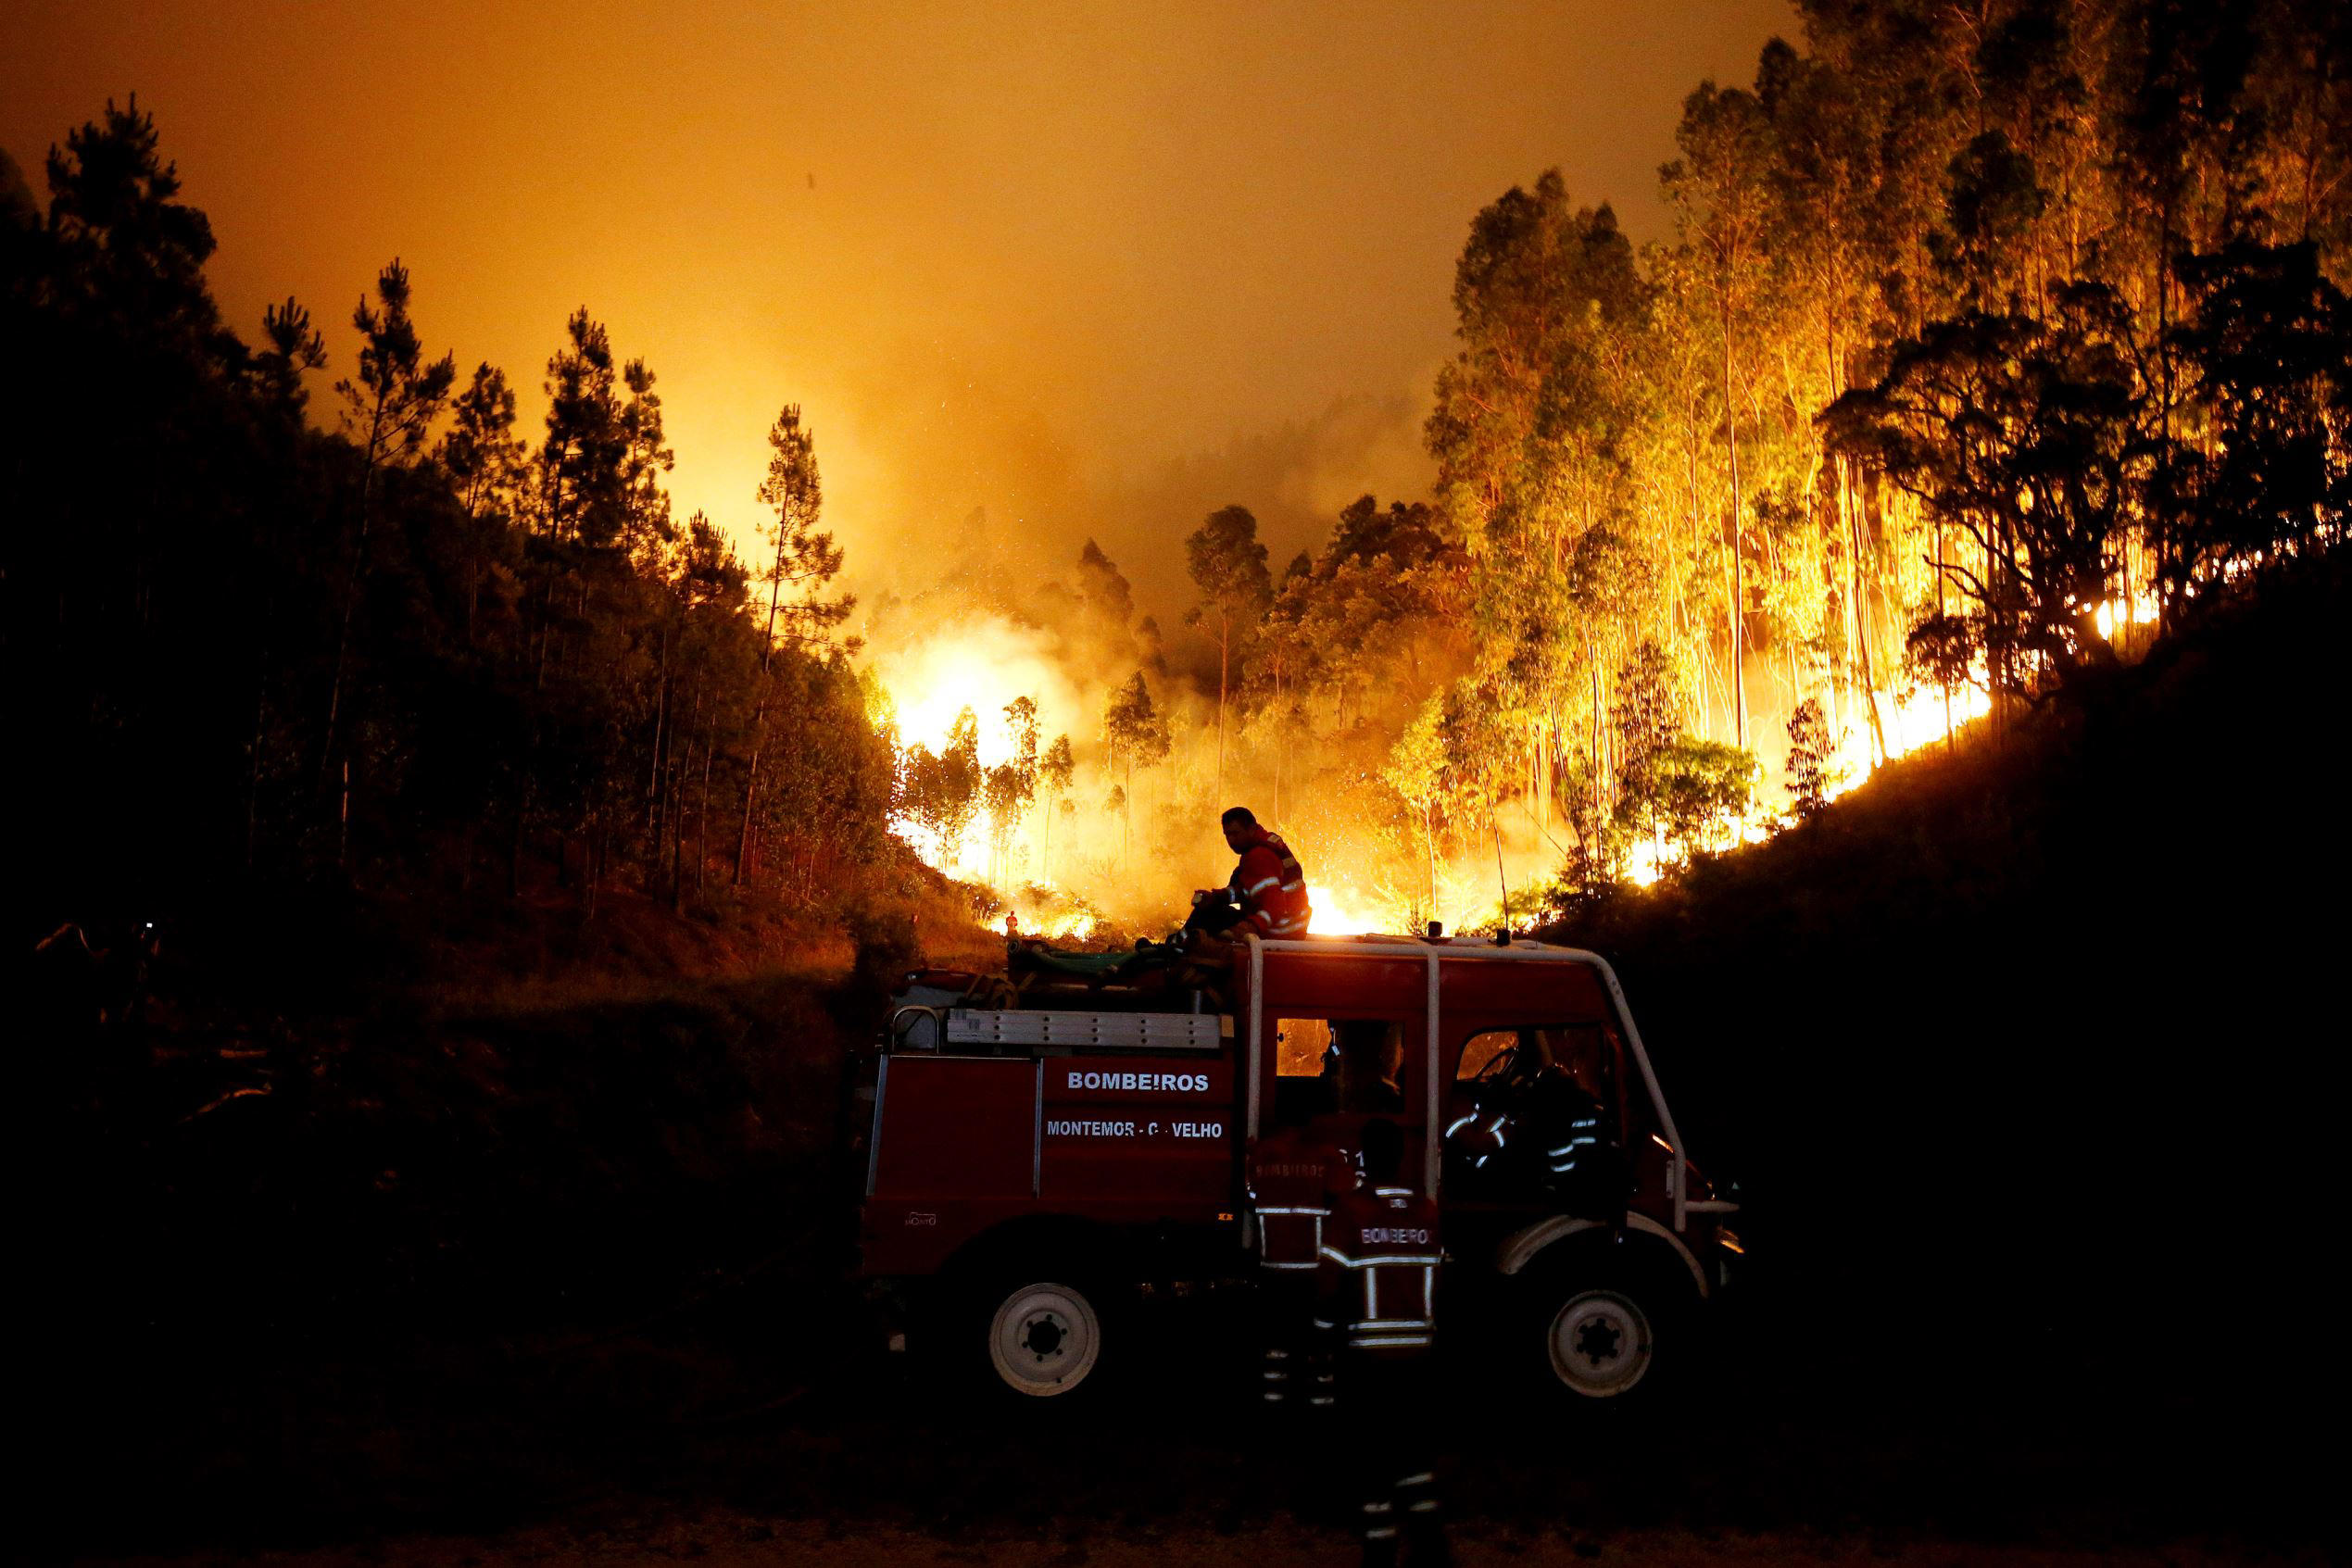 Slide 1 of 102: Firefighters work to put out a forest fire near Bouca, in central Portugal, June 18, 2017.  REUTERS/Rafael Marchante     TPX IMAGES OF THE DAY